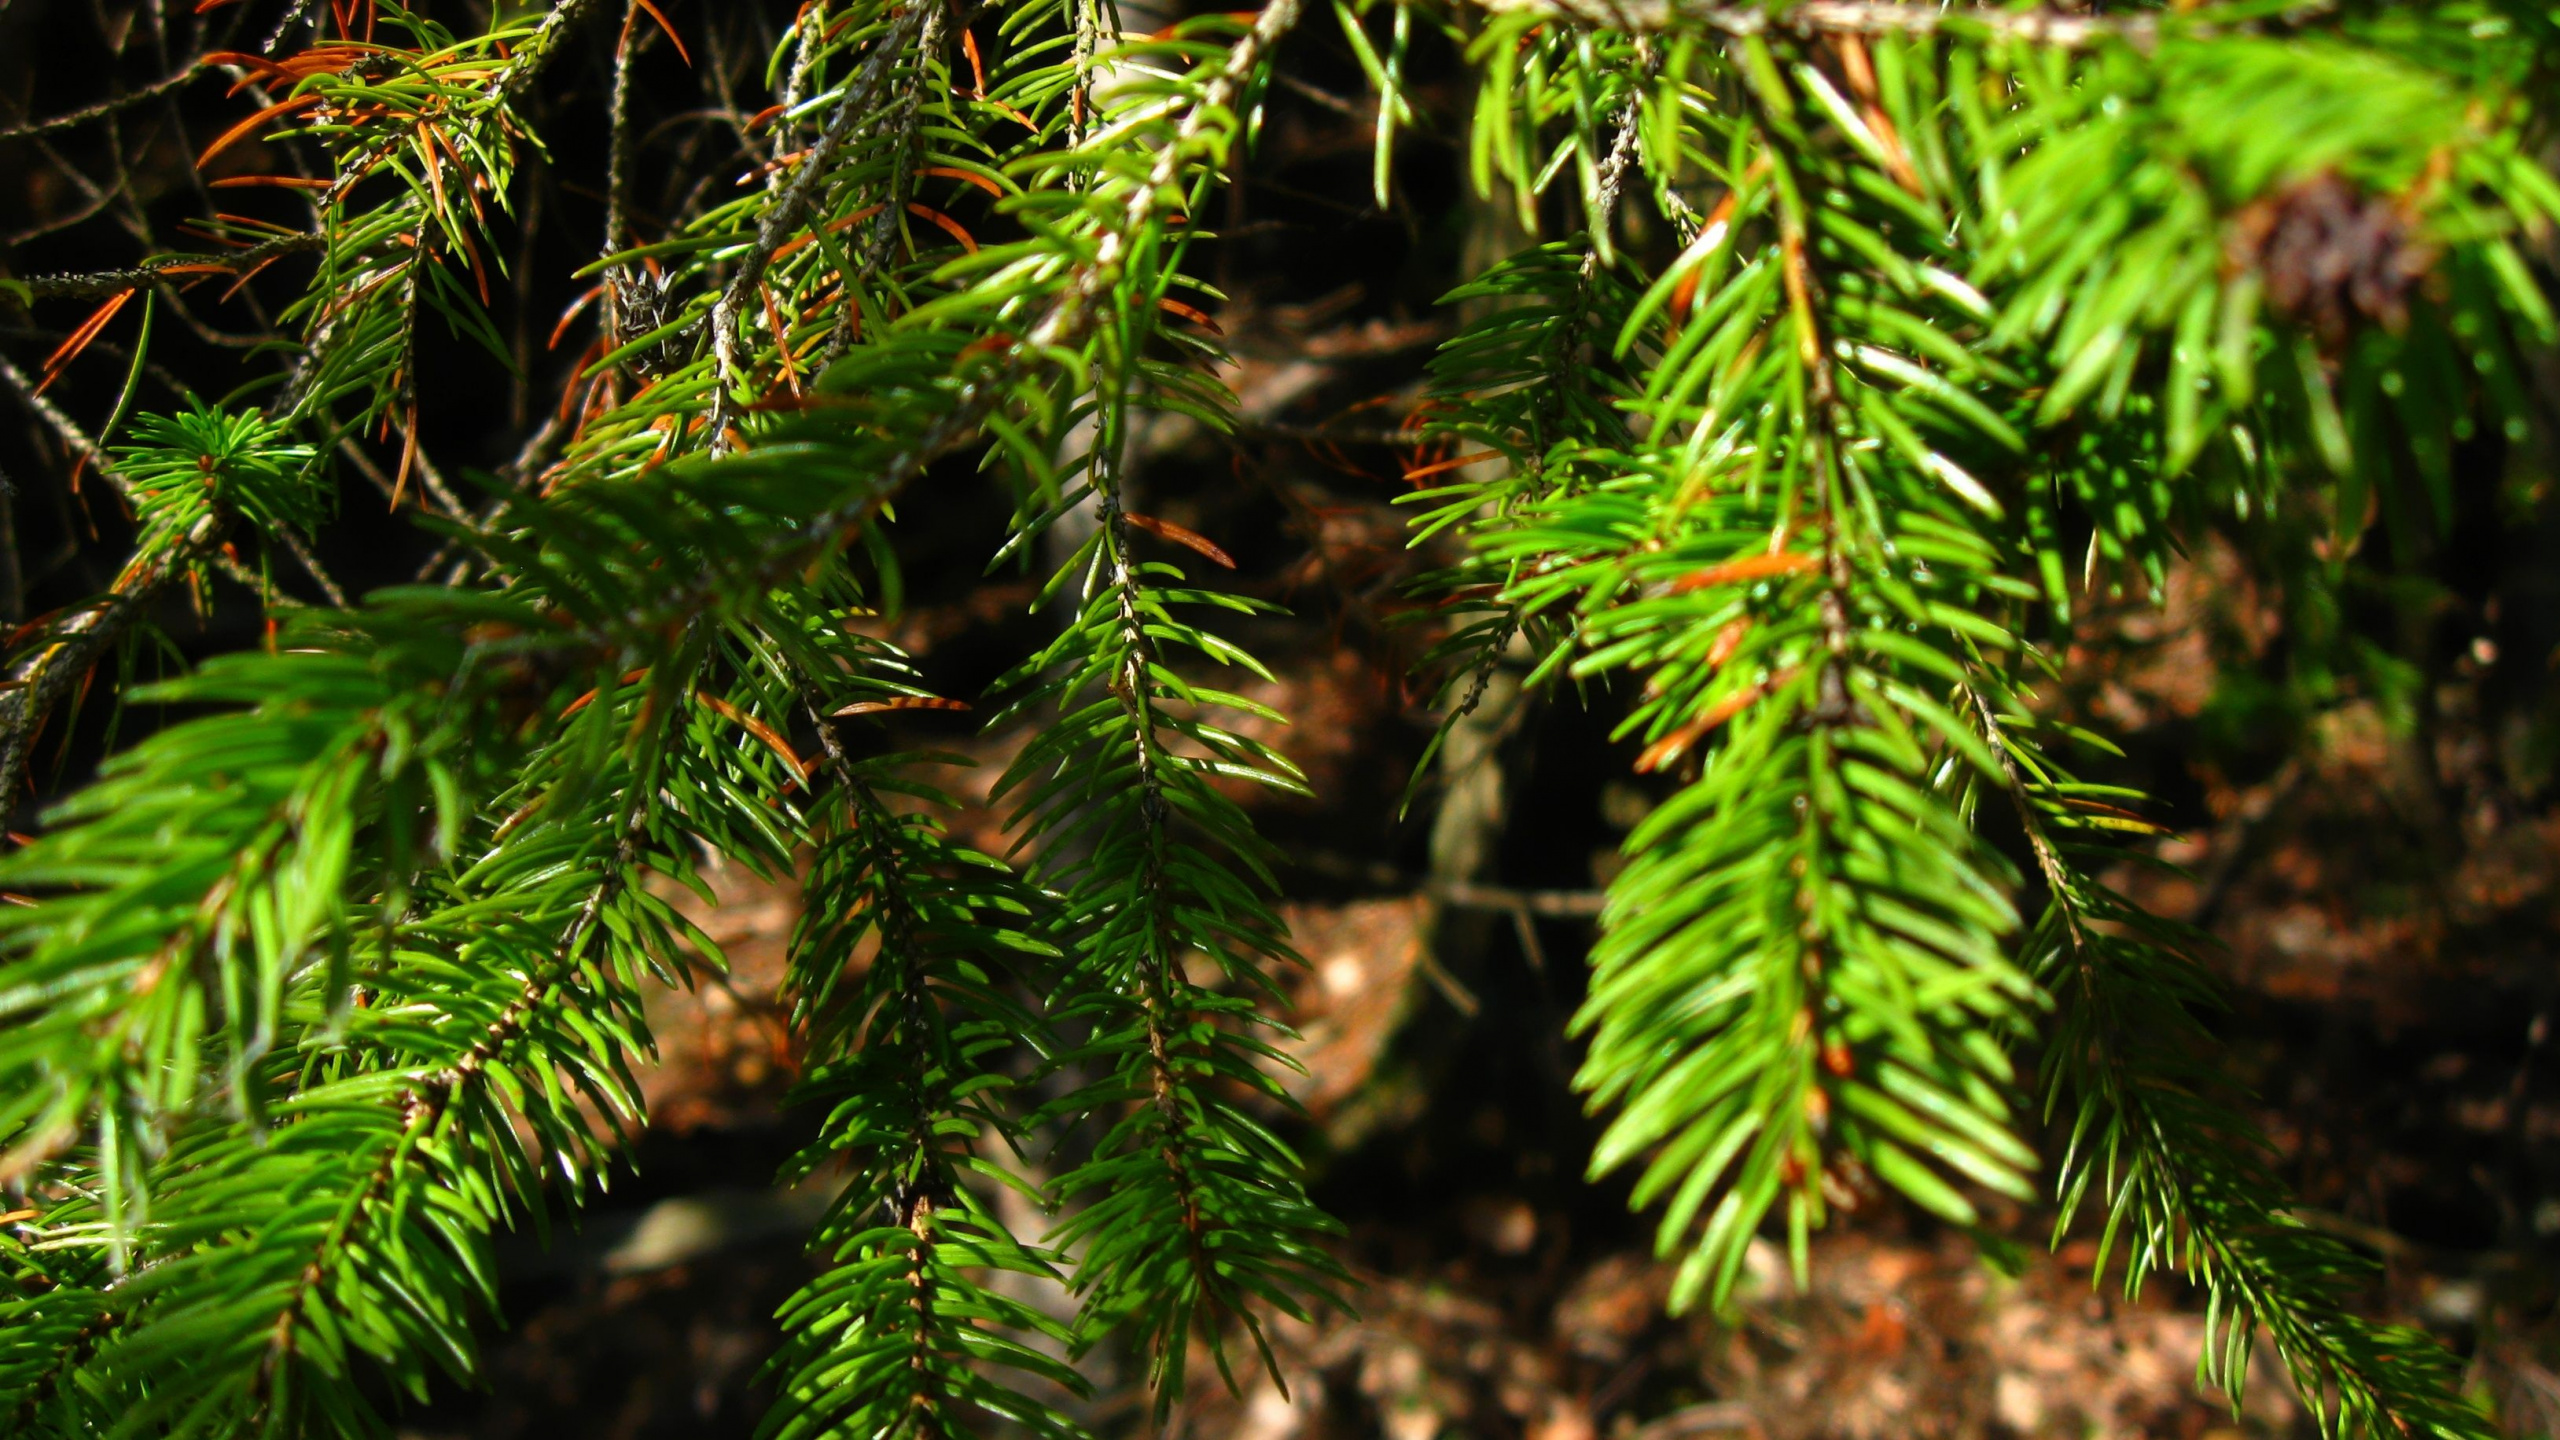 Green Pine Tree Leaves in Close up Photography. Wallpaper in 2560x1440 Resolution